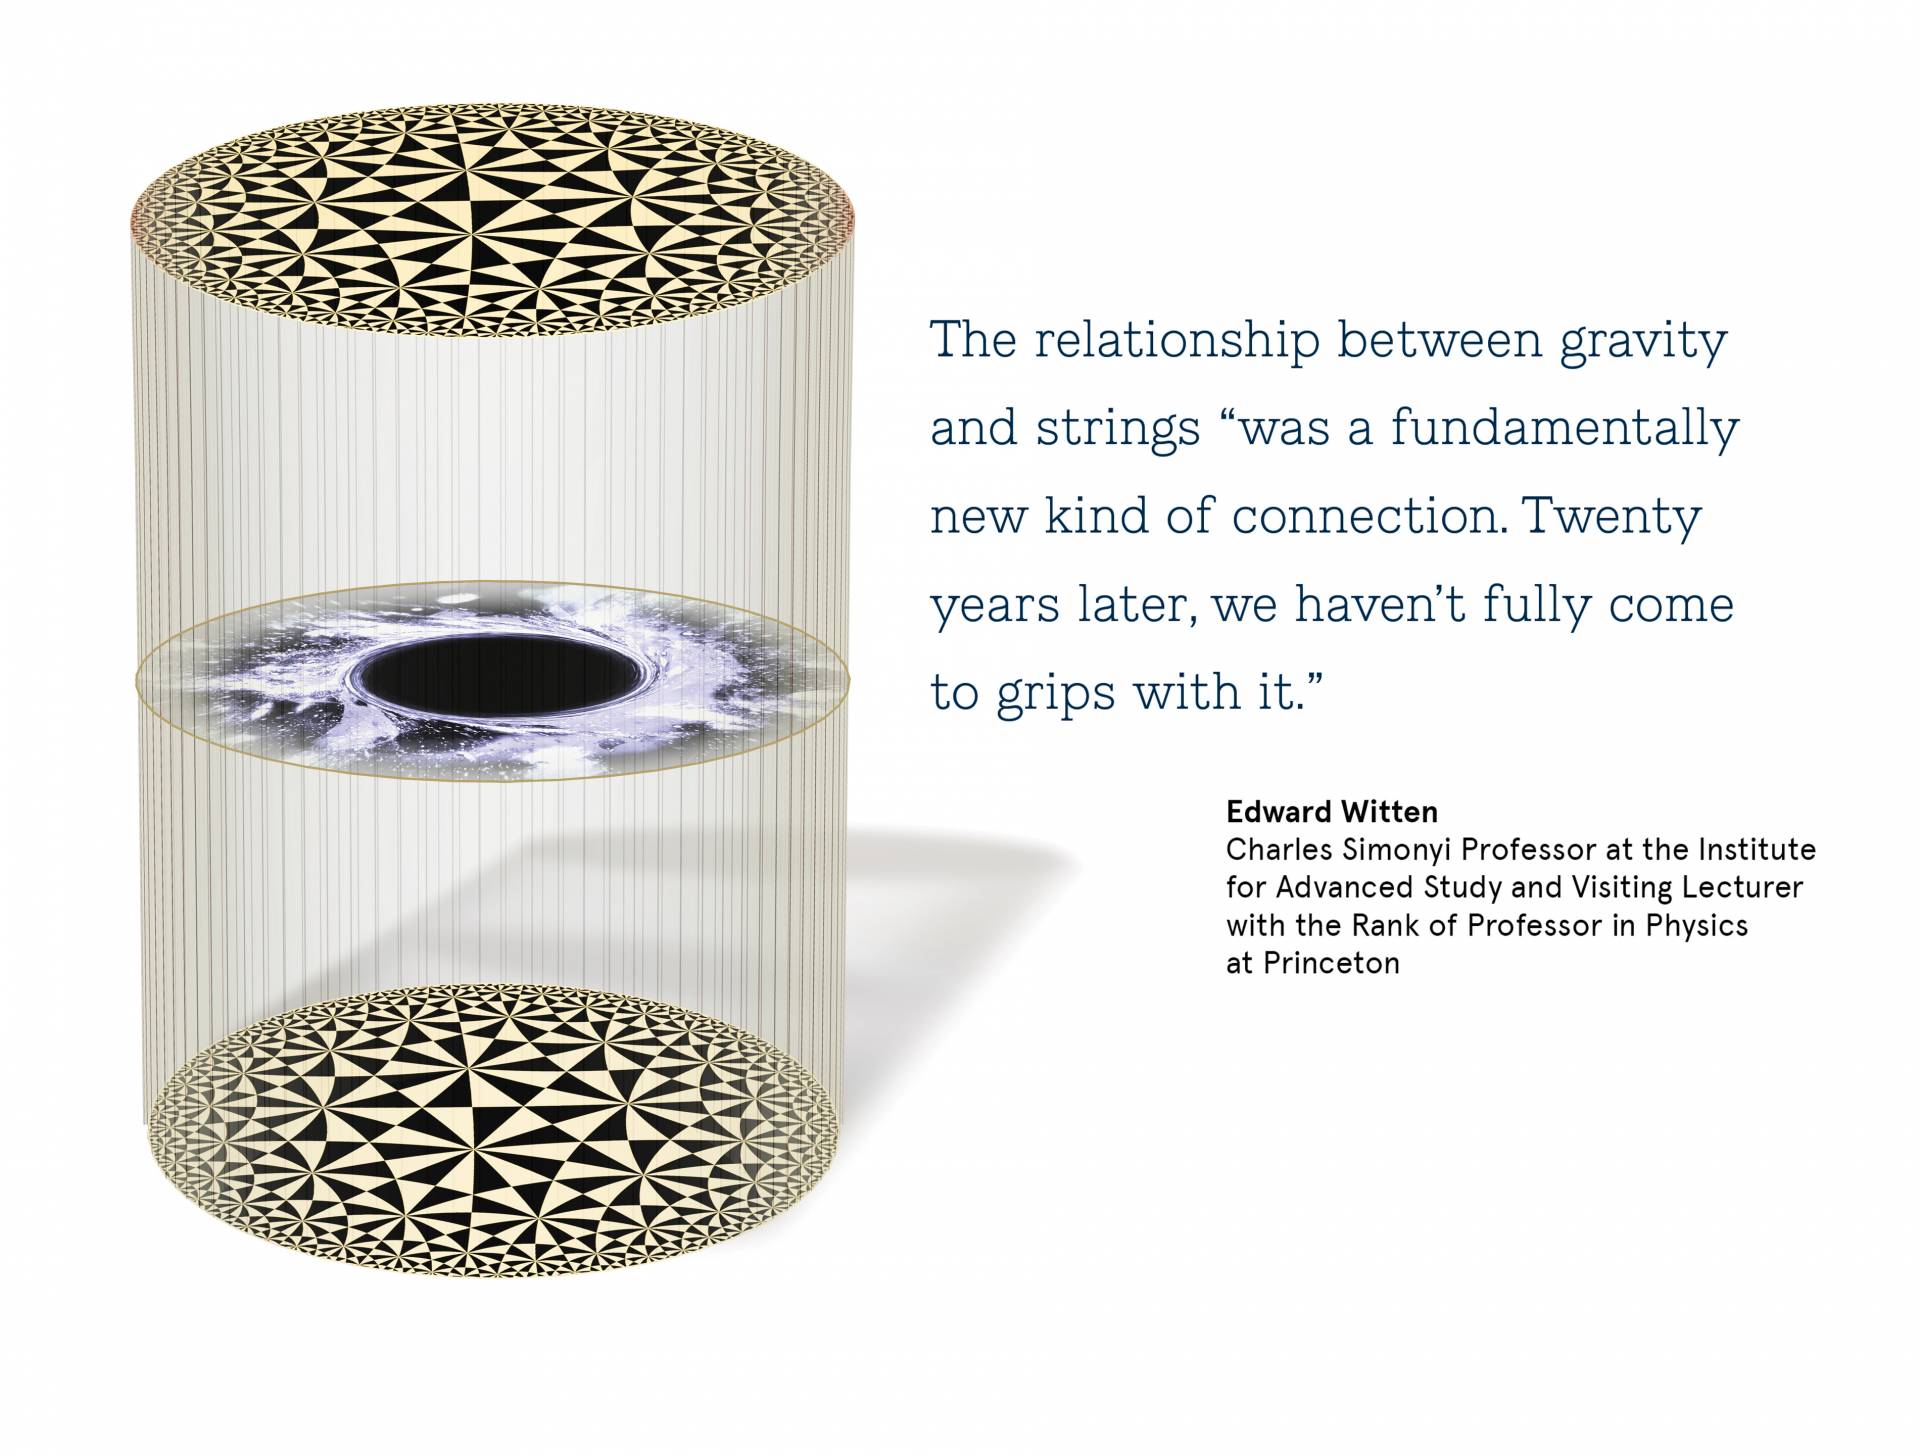 Conceptual art with a quote from Edward Witten, the Charles Simonyi Professor at the Institute for Advanced Study and Visiting Lecturer with the Rank of Professor in Physics at Princeton: "The relationship between gravity and strings “was a  fundamentally new kind of connection. Twenty years  later, we haven’t fully come to grips with it.”